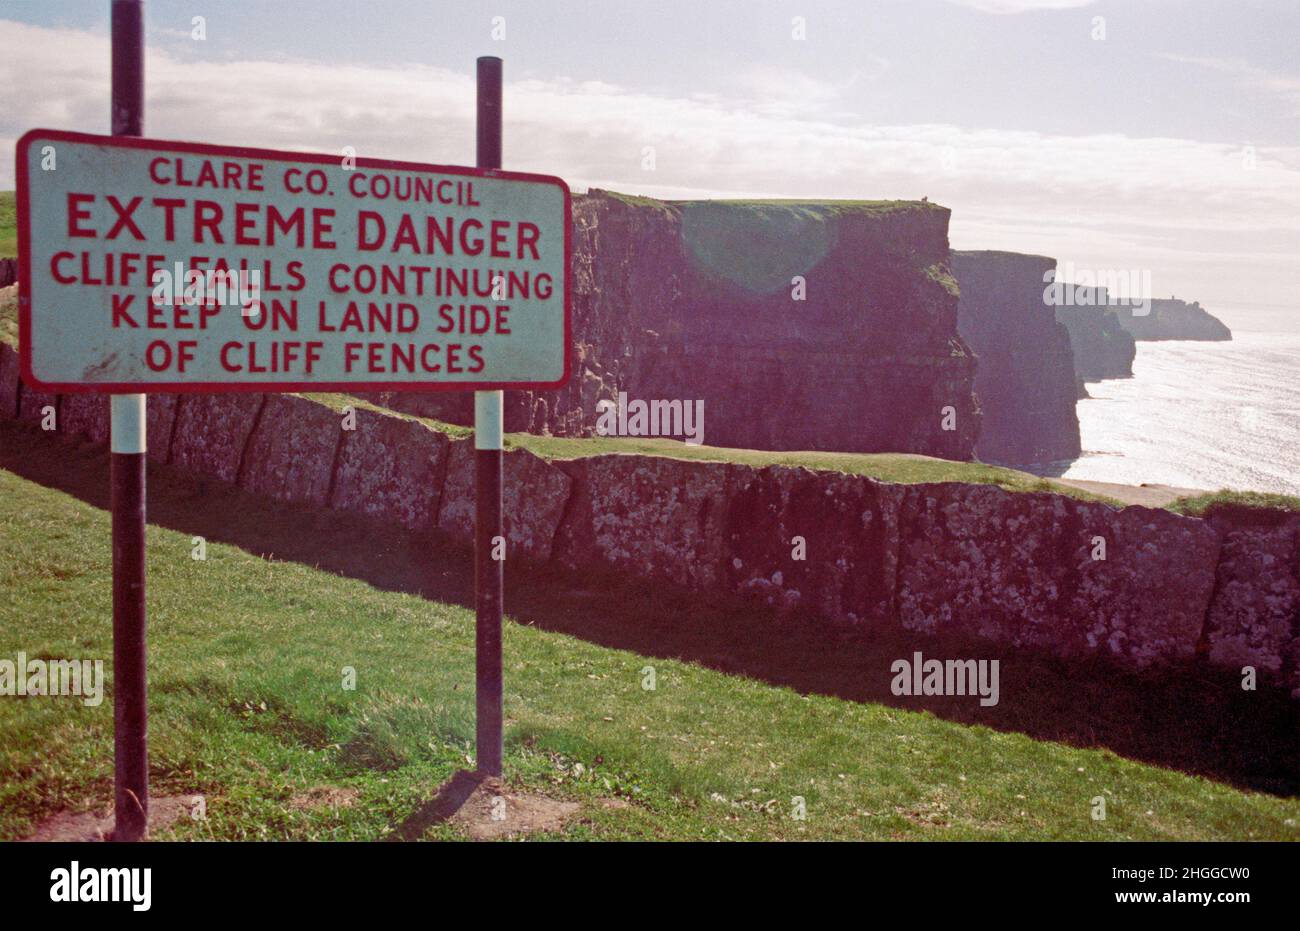 Cliffs of Moher, Lislorkan, 08.09.1990, County Clare, Irland | Cliffs of Moher, Lislorkan, September 08, 1990, County Clare, Republic of Ireland Stock Photo